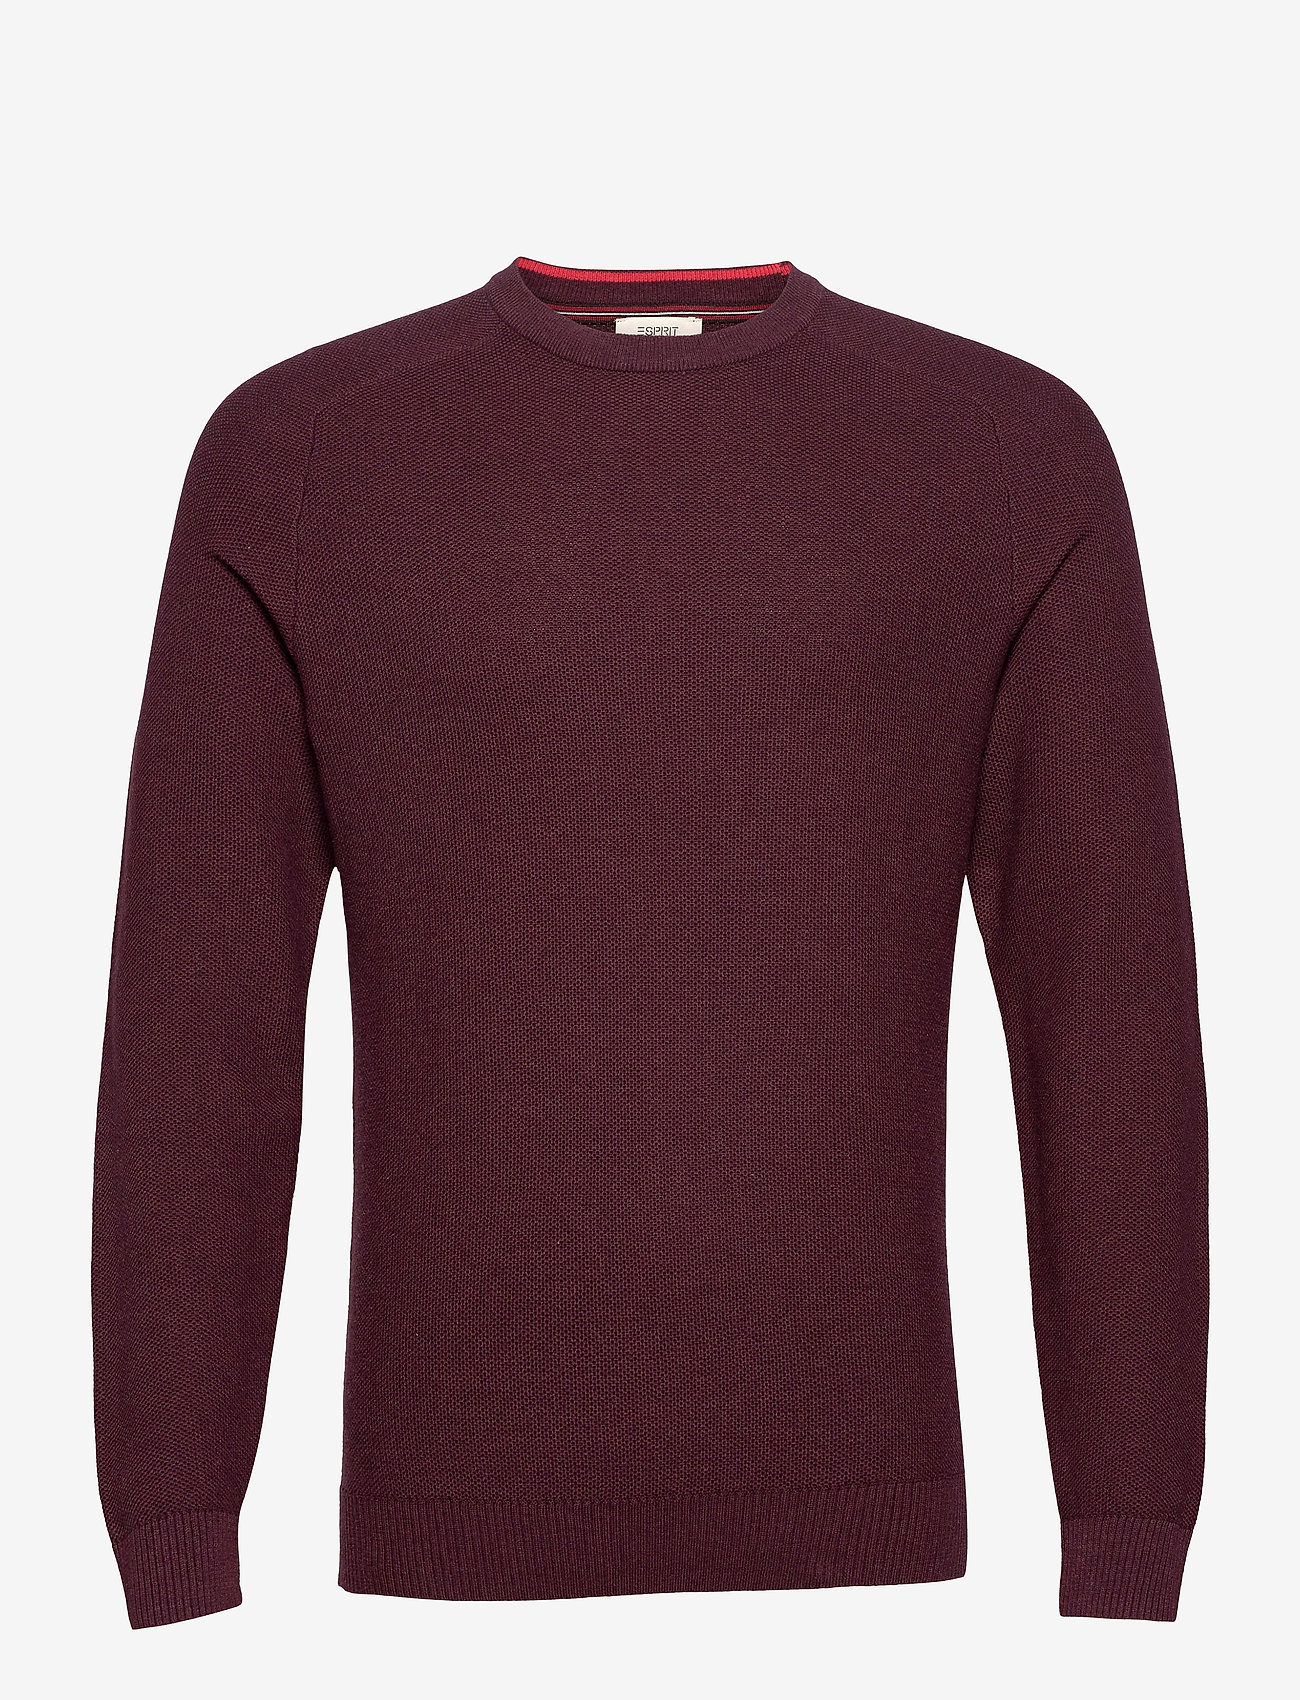 Esprit Casual - Sweaters - rund hals - bordeaux red - 0